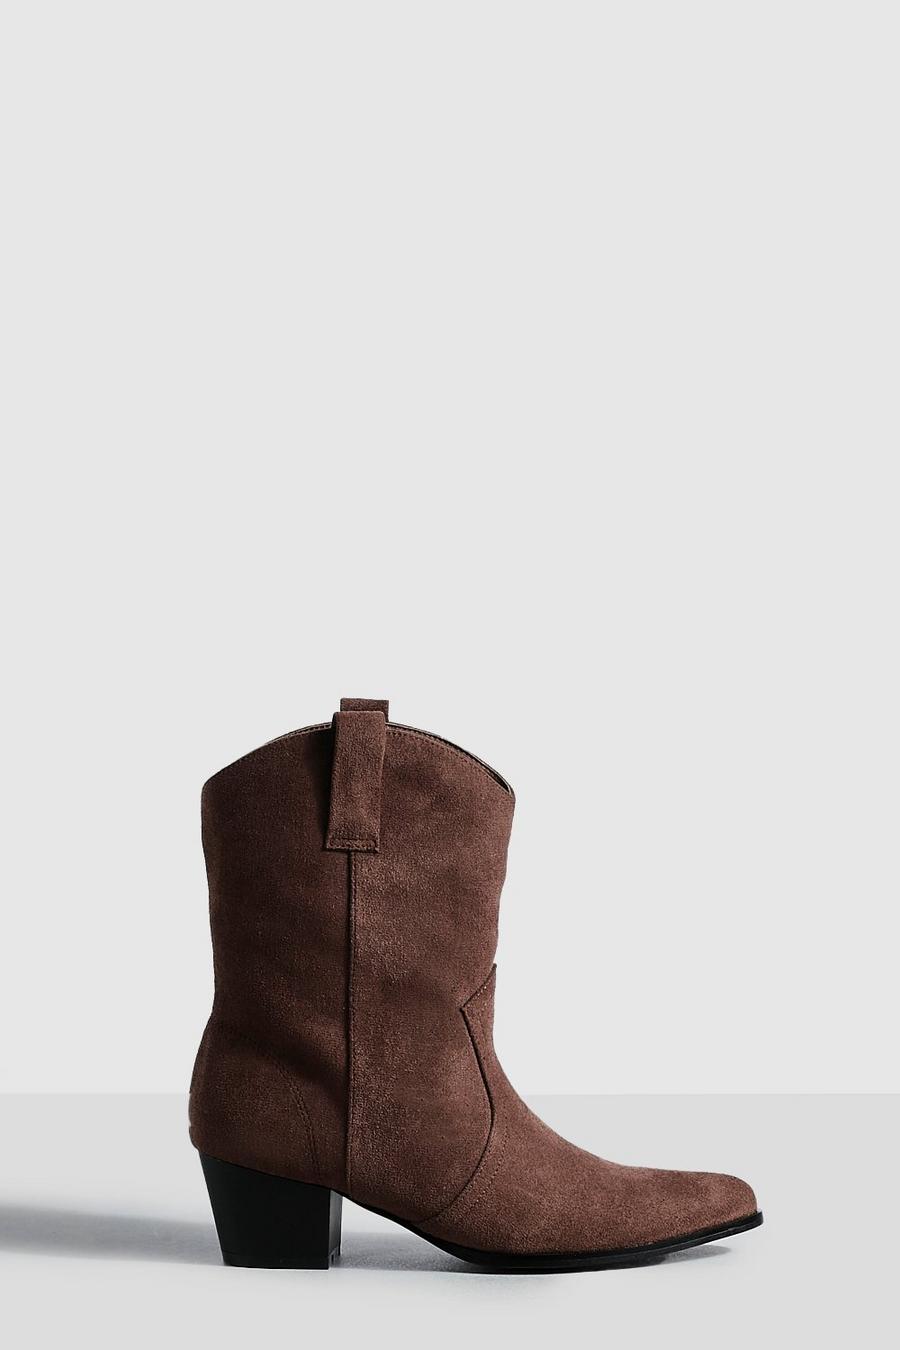 Chocolate brun Basic Tab Detail Western Cowboy Ankle Boots